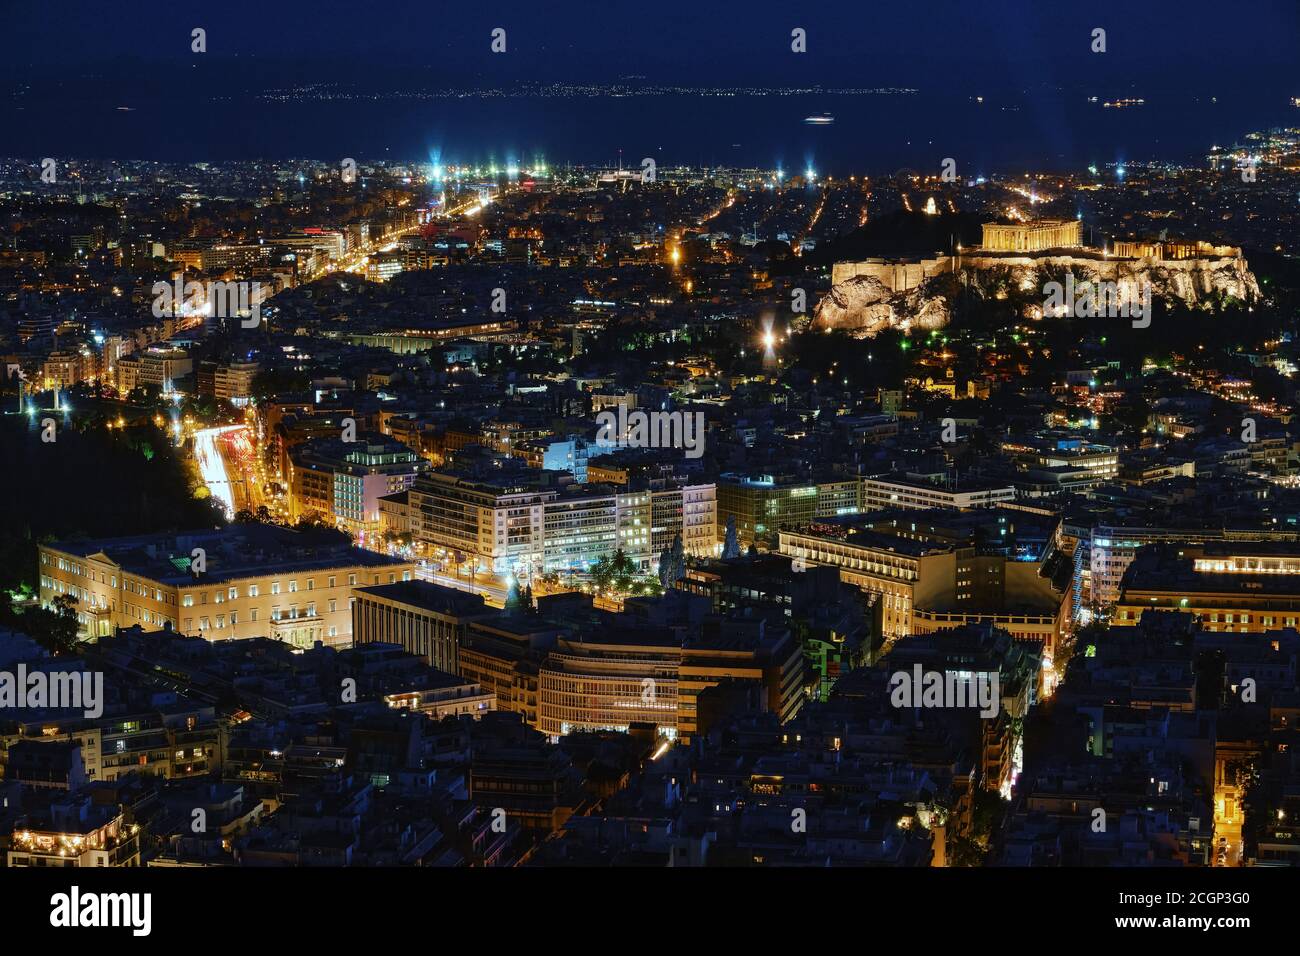 Night view of Athens and Acropolis, Parthenon and Erechtheion, Hellenic Parliament in city lights. Famous iconic view of UNESCO world heritage site. Stock Photo